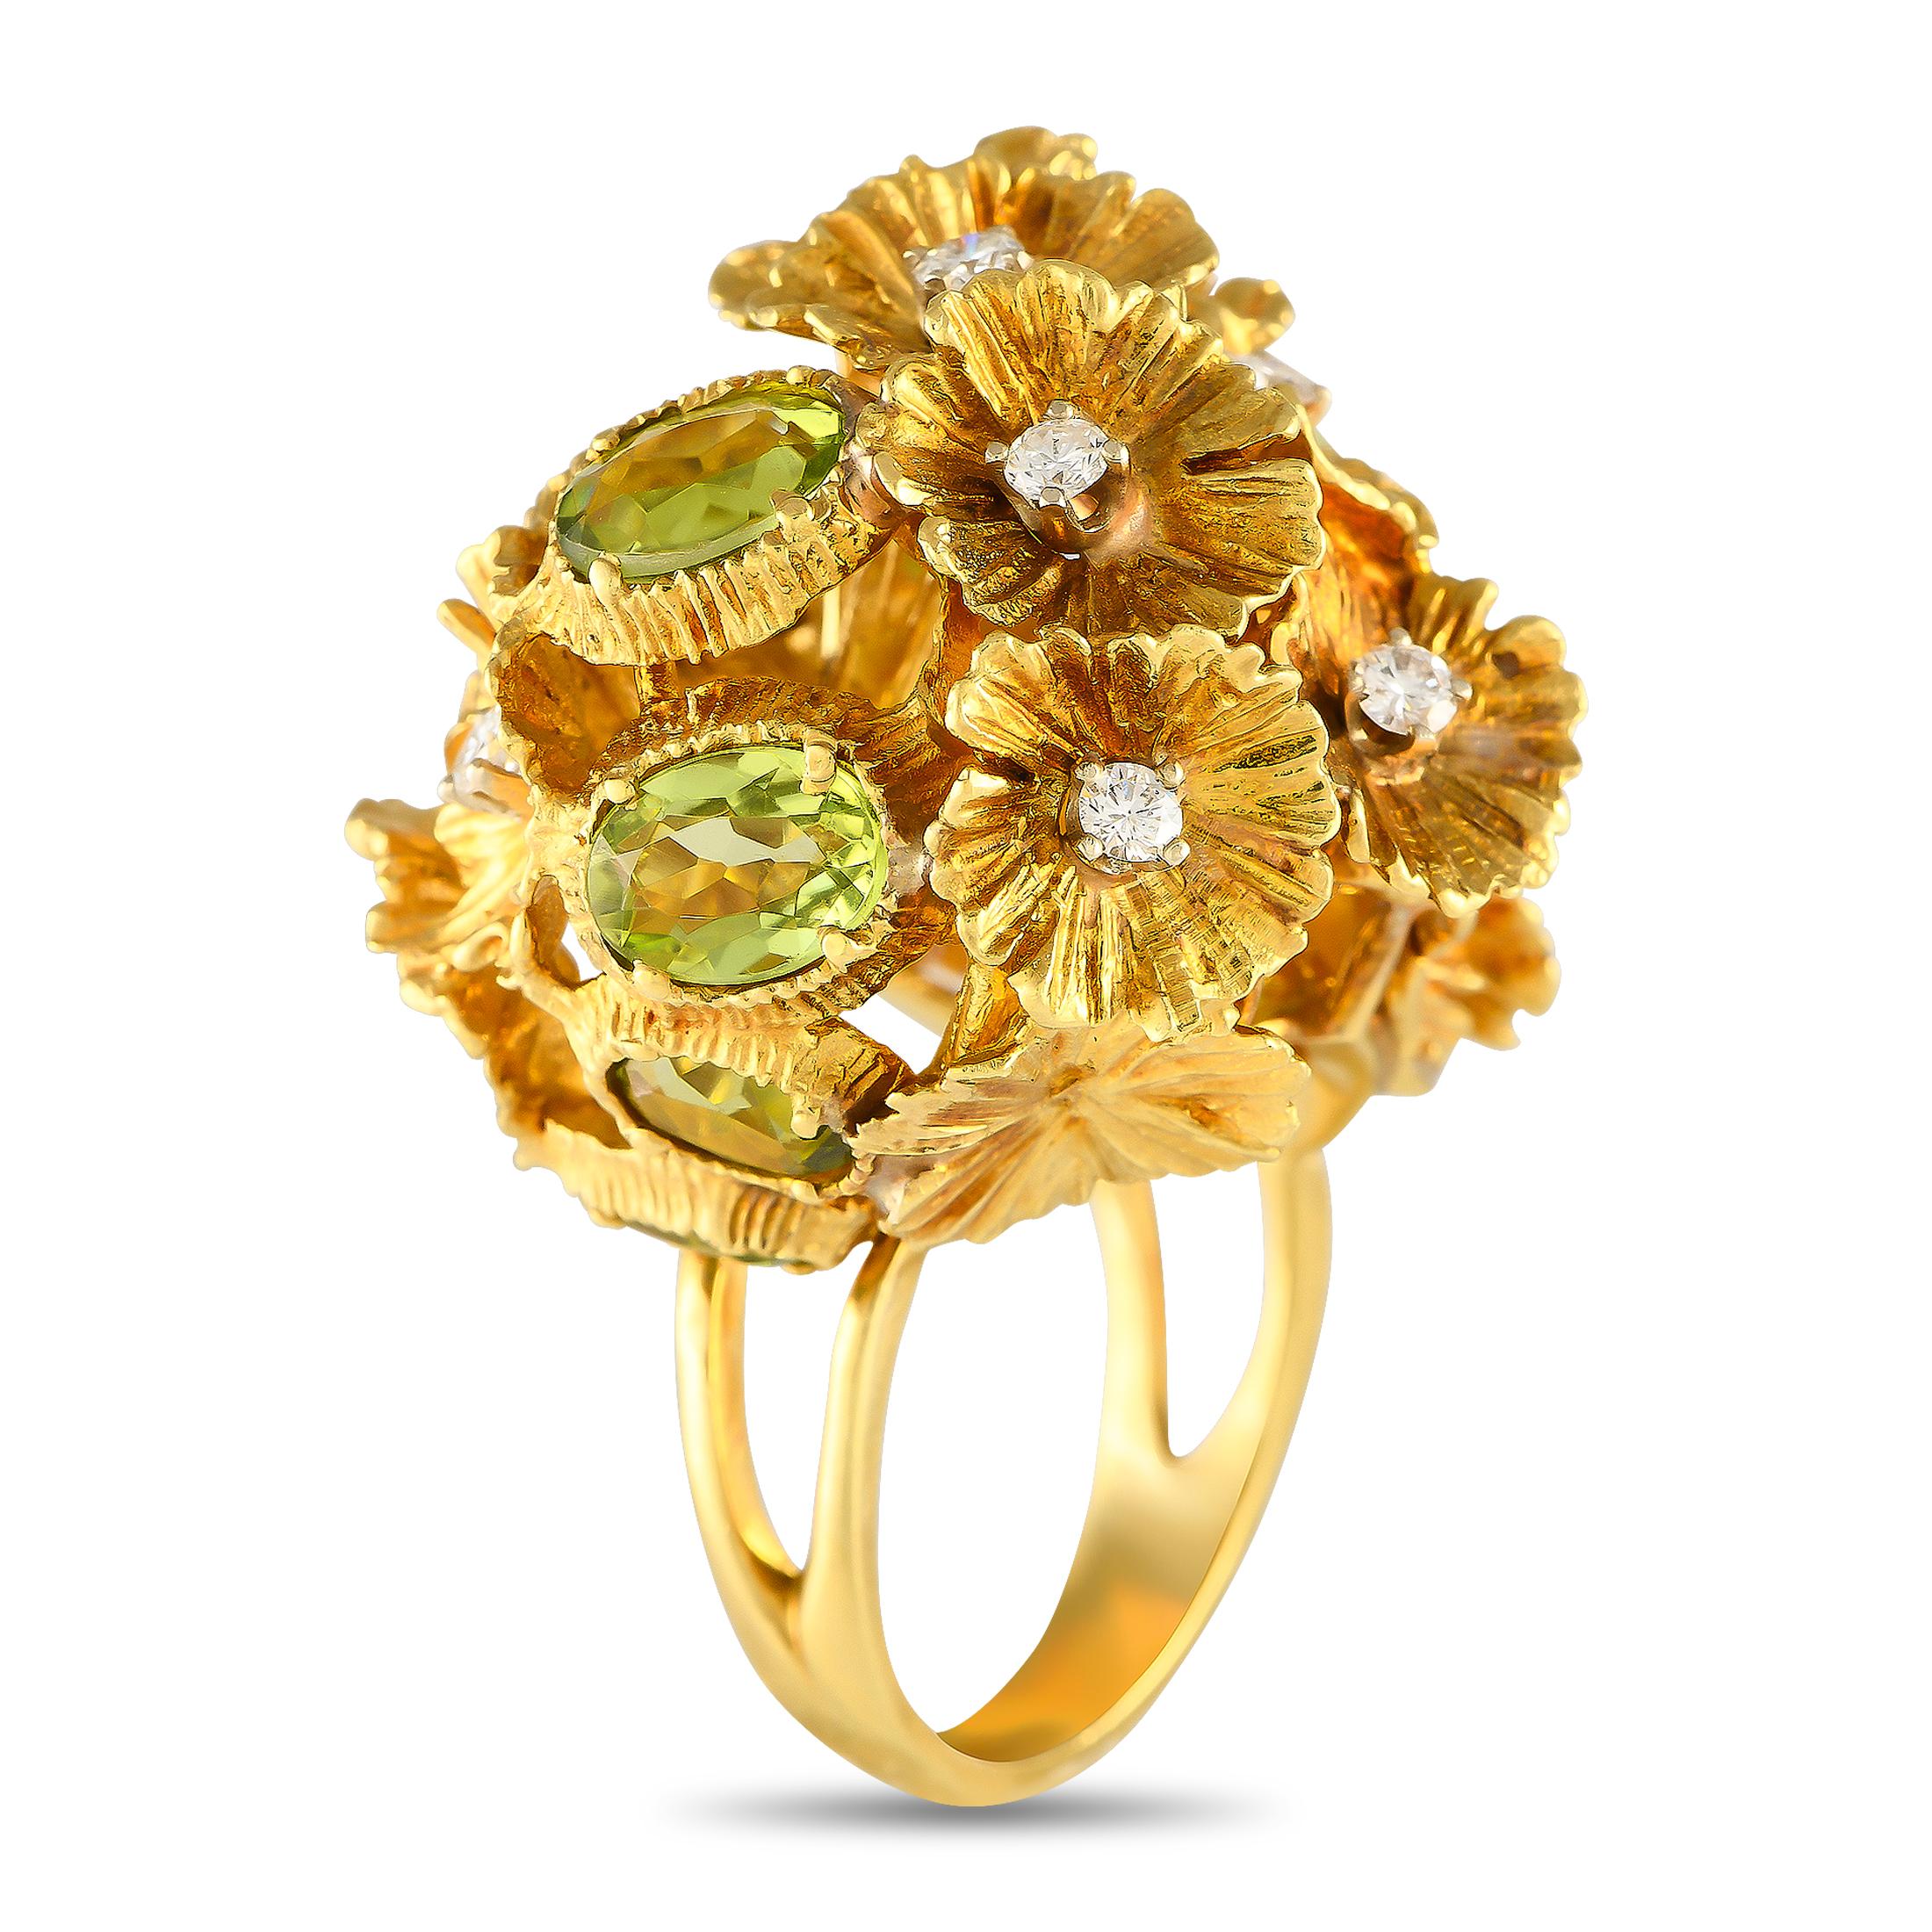 Have an affinity for flowers? Show off your blooming sense of style through this flower-themed statement ring. This exquisite piece in 18K yellow gold features a polished split shank topped with a sculpted bouquet of golden blossoms with diamond